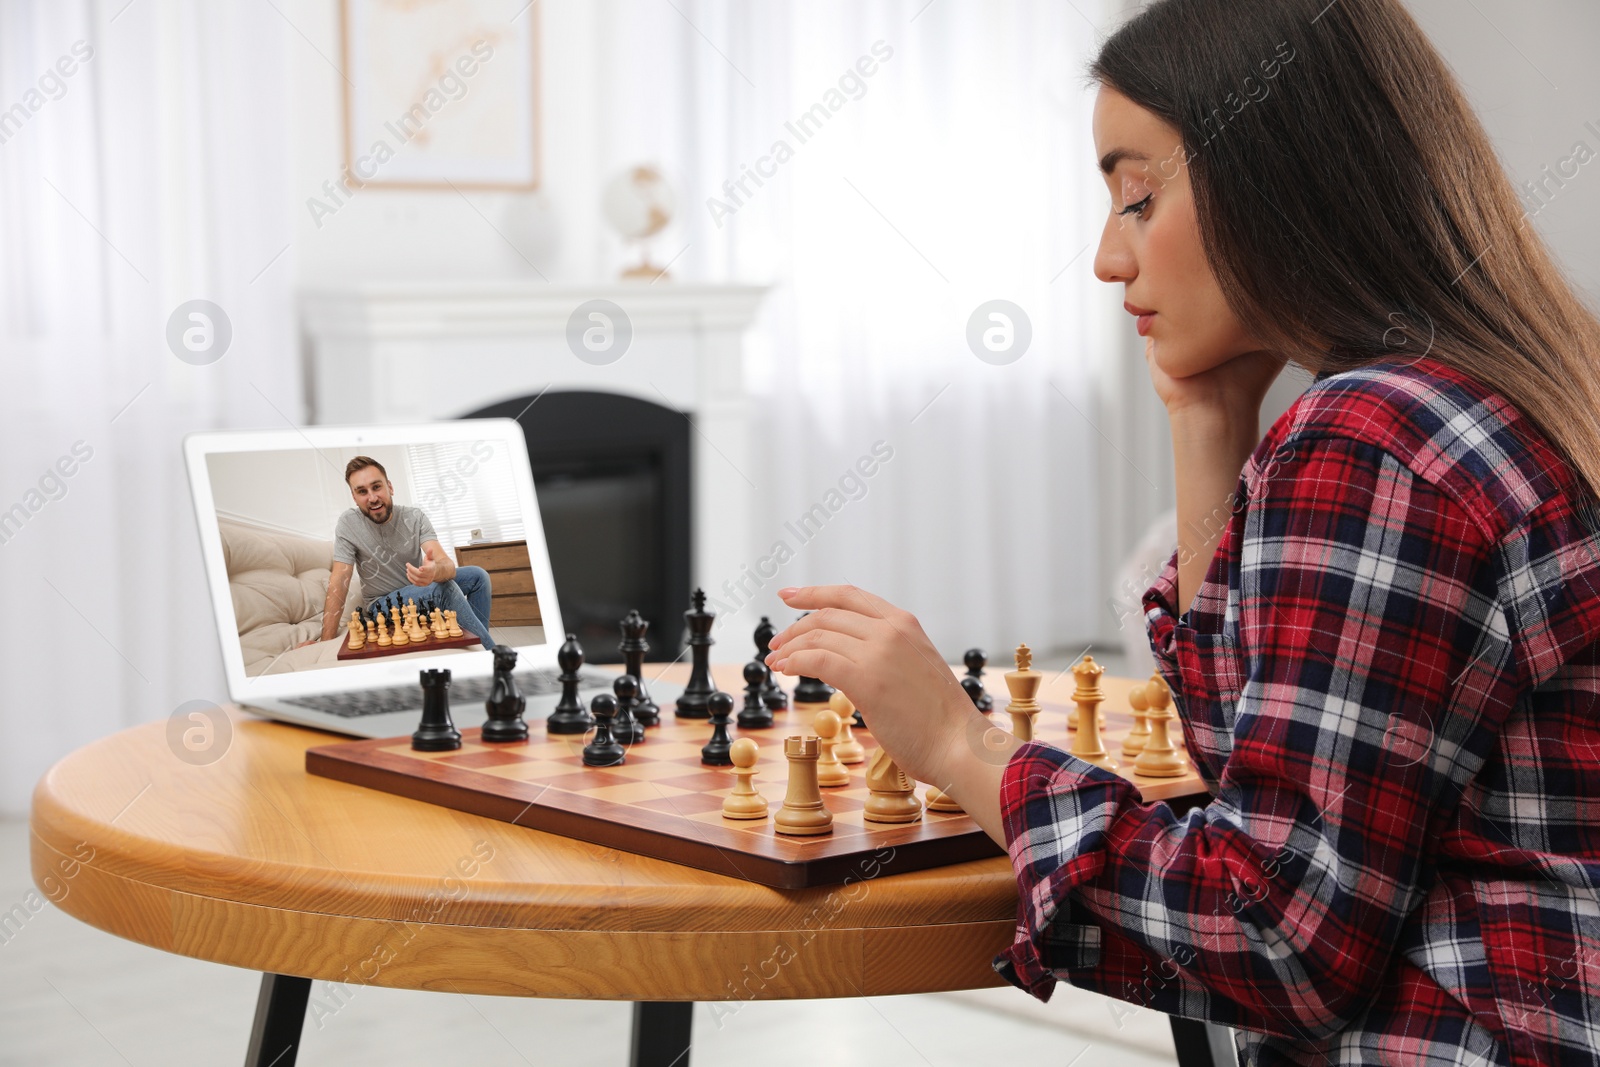 Image of Young woman playing chess with partner via online video chat at home